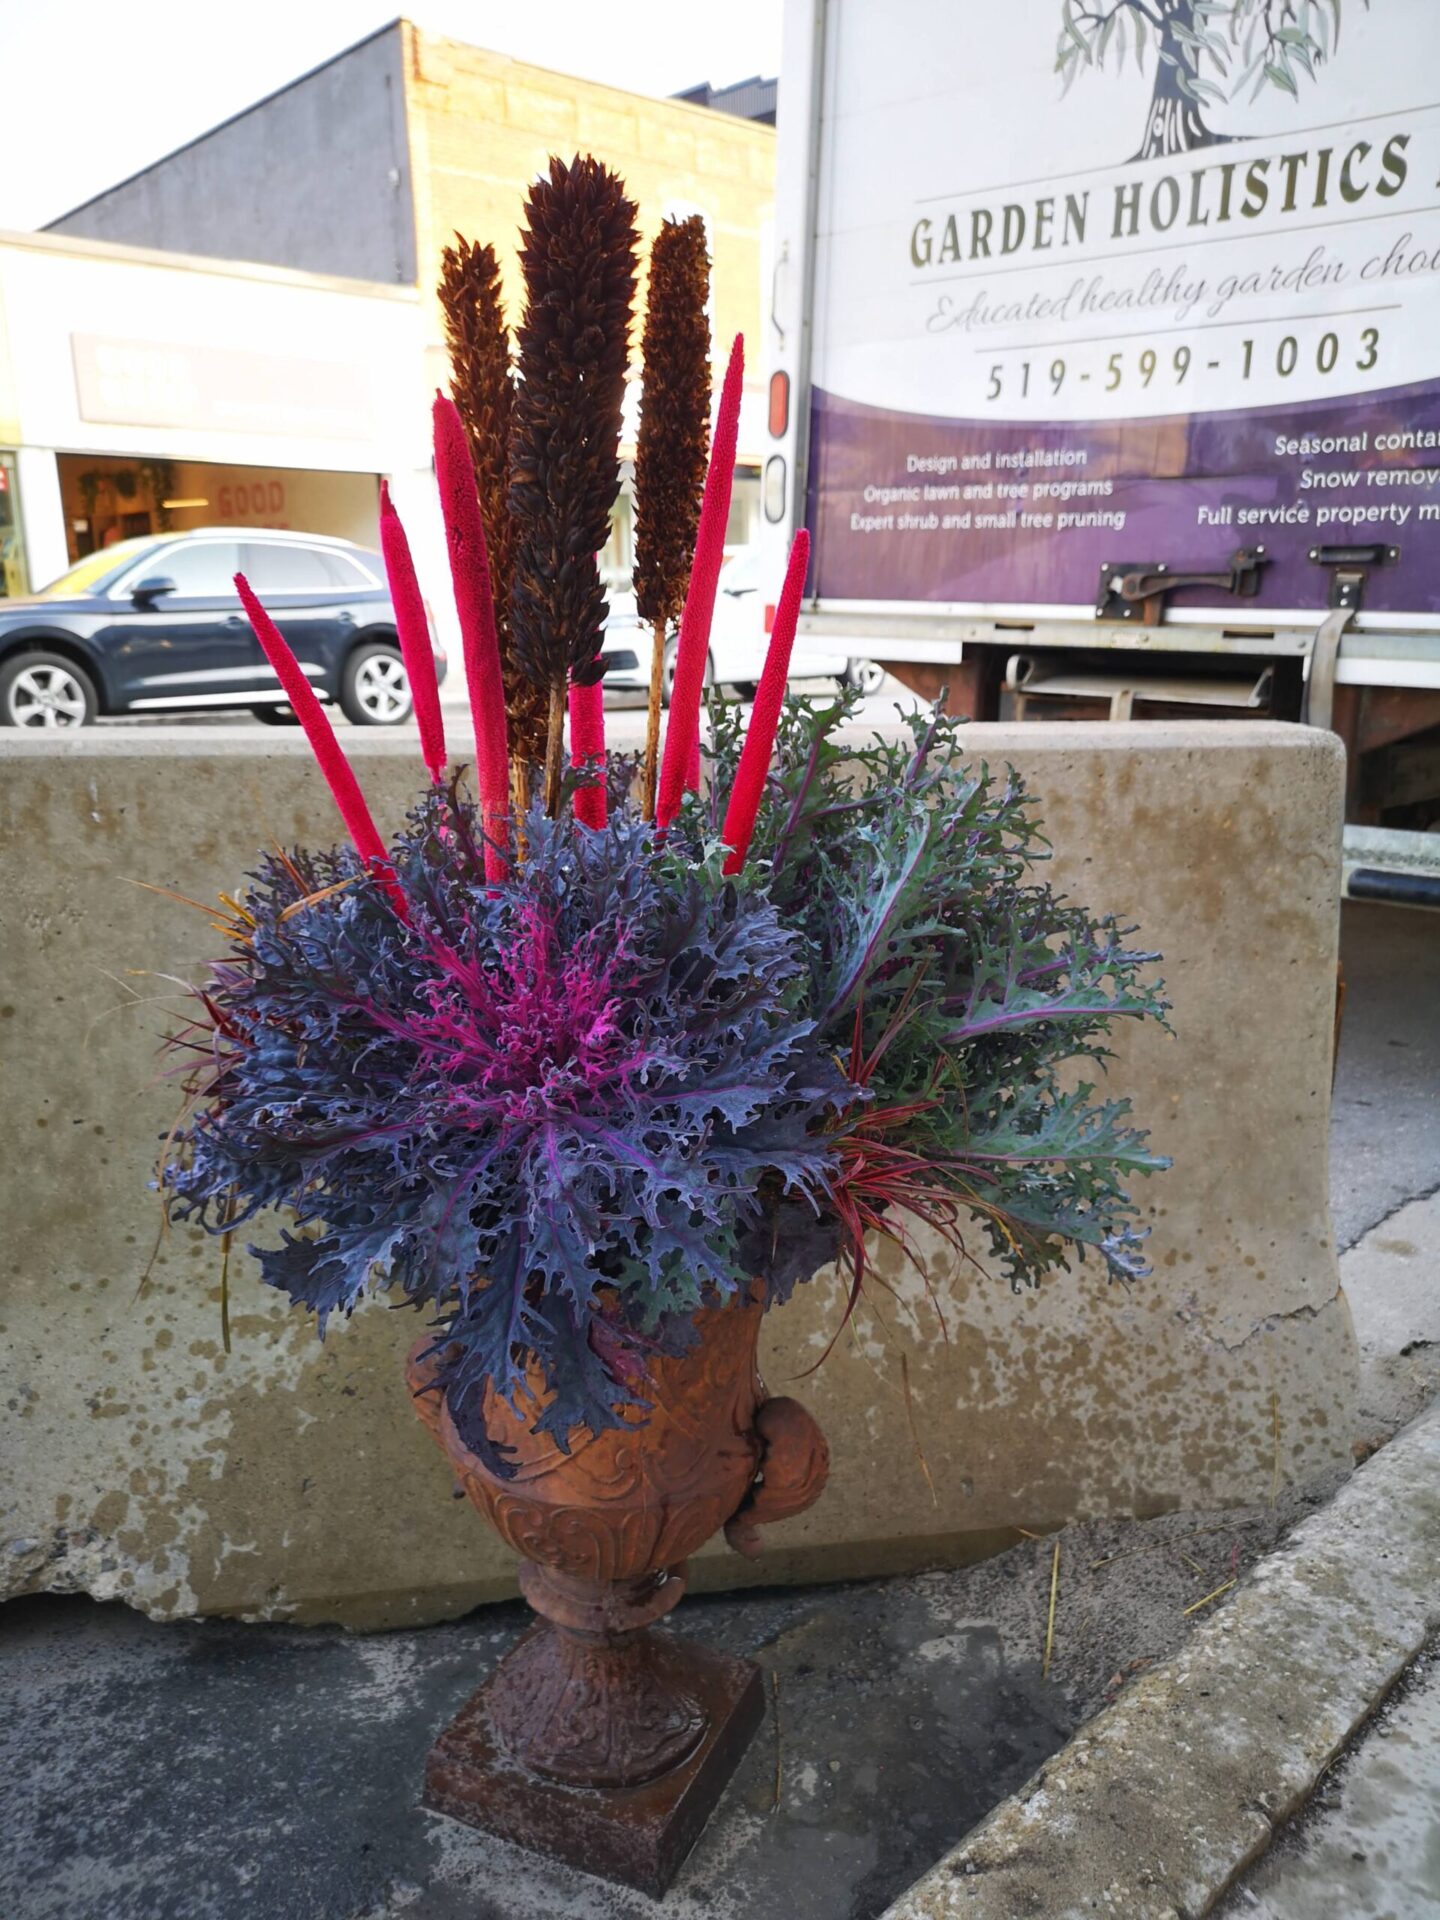 A decorative arrangement with red and brown spikes, purple foliage in a rusted urn, sits on a sidewalk with a truck and building in the background.